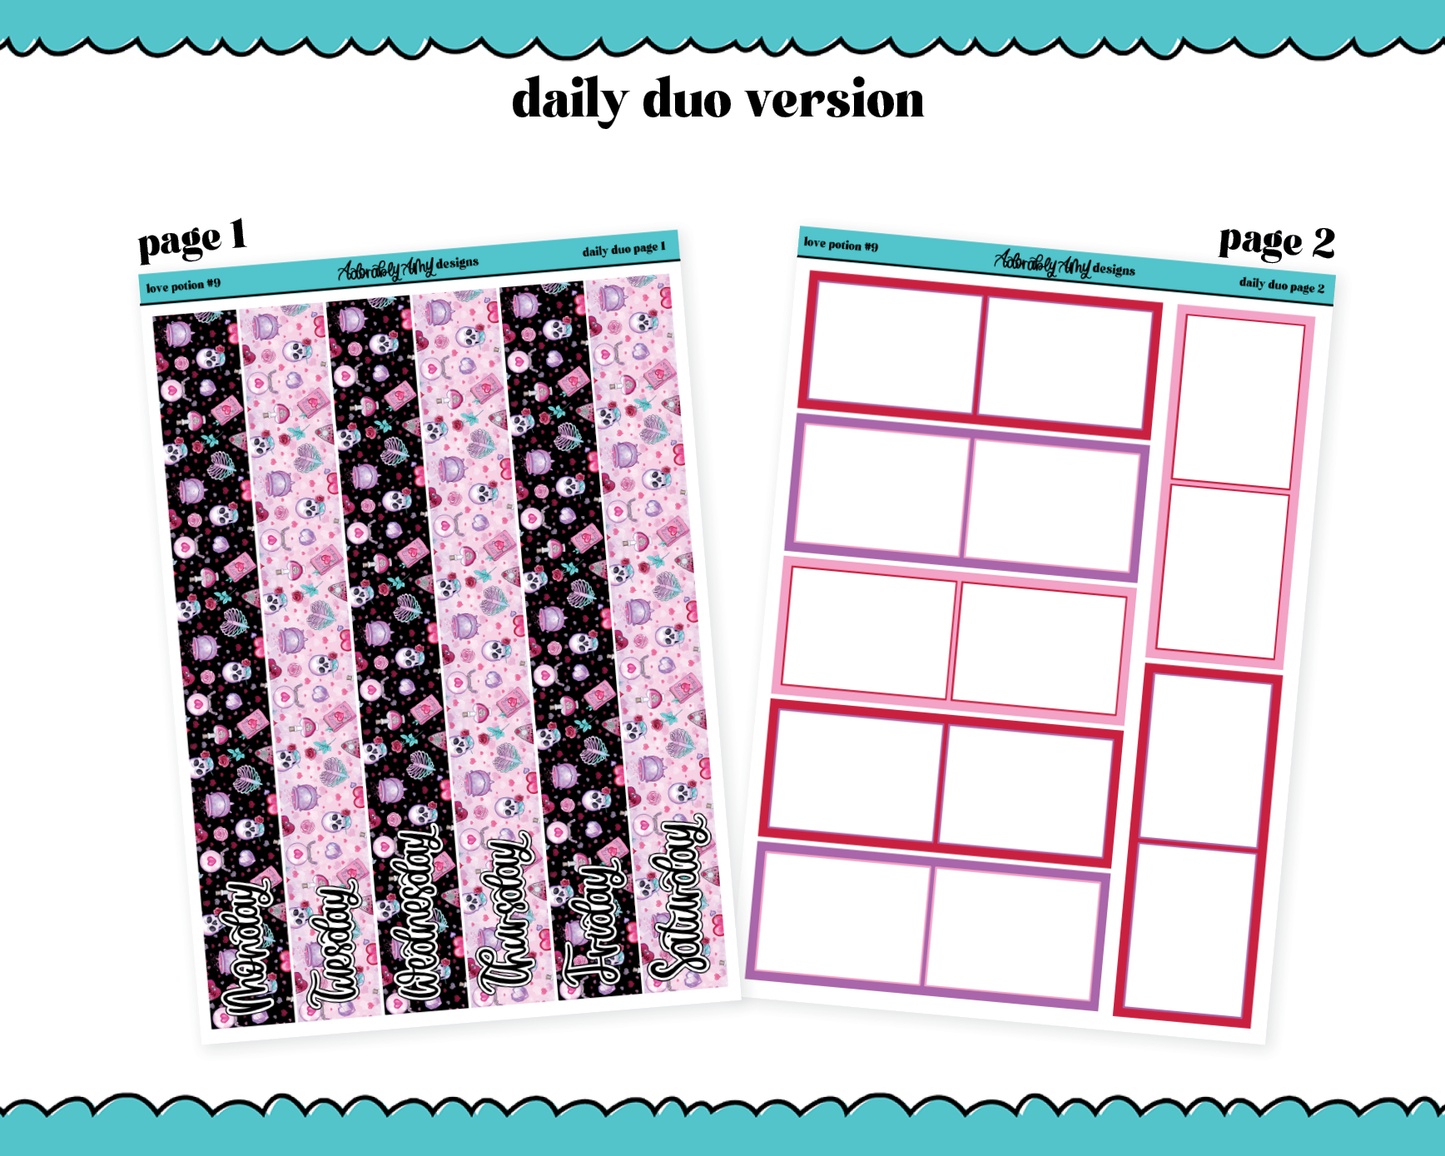 Daily Duo Love Potion #9 Weekly Planner Sticker Kit for Daily Duo Planner